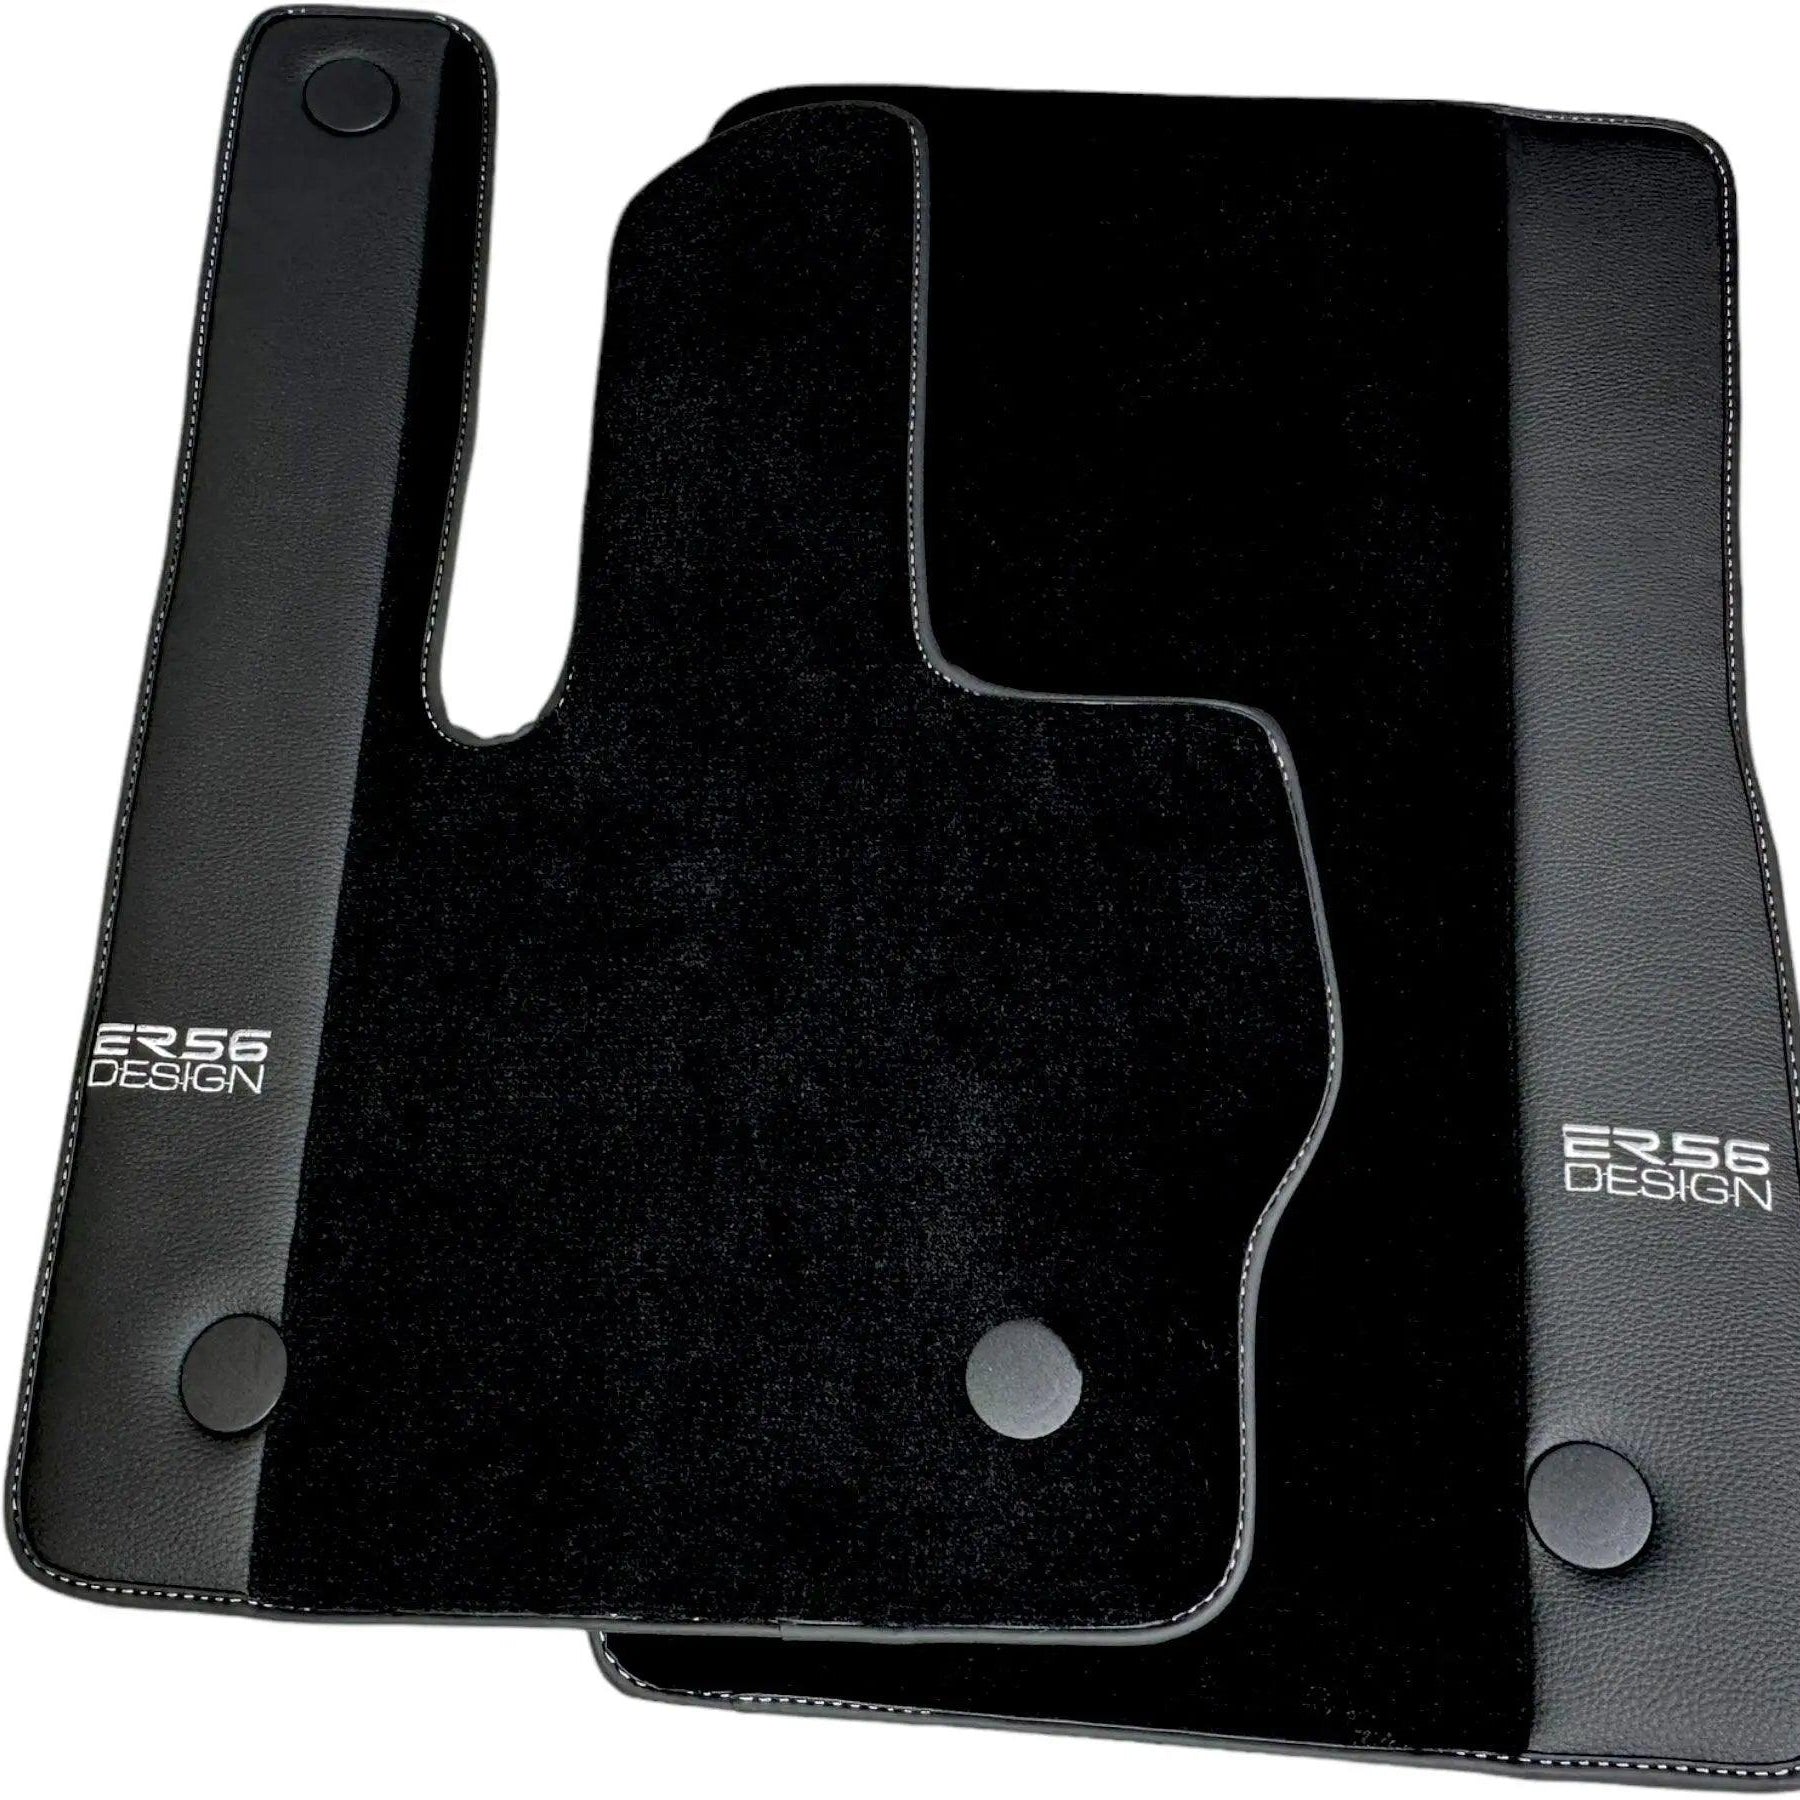 Black Floor Mats For Mercedes-Benz G Class W463 (2008-2018) With Leather Borders ER56 Design - AutoWin